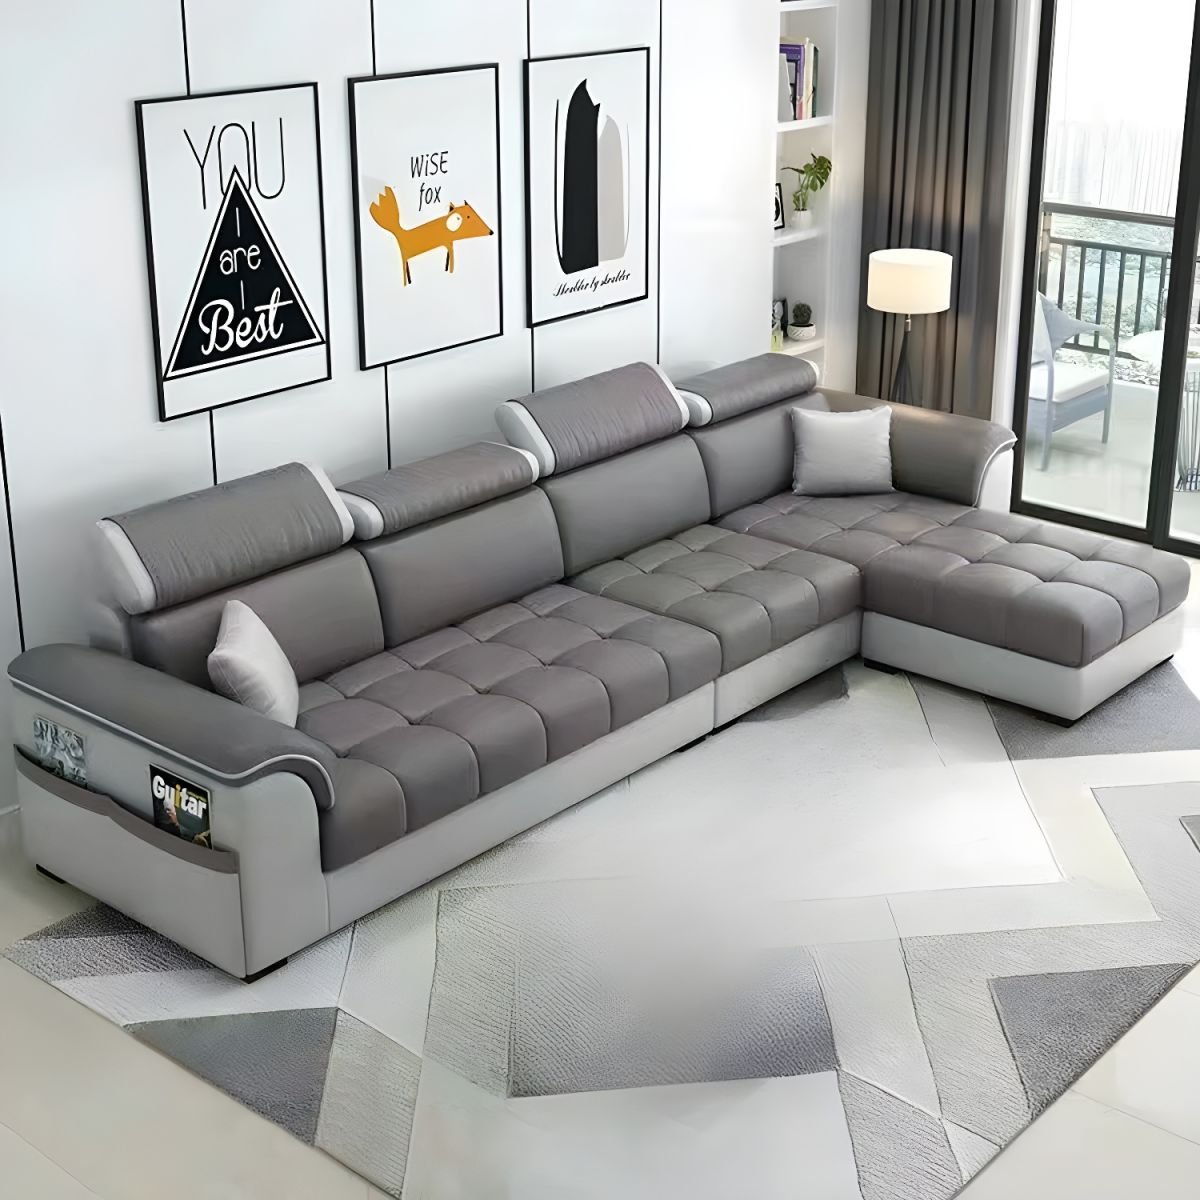 Contemporary L-Shaped Sectional Sofa with Adjustable Pillows and Storage - Tech Cloth Grey